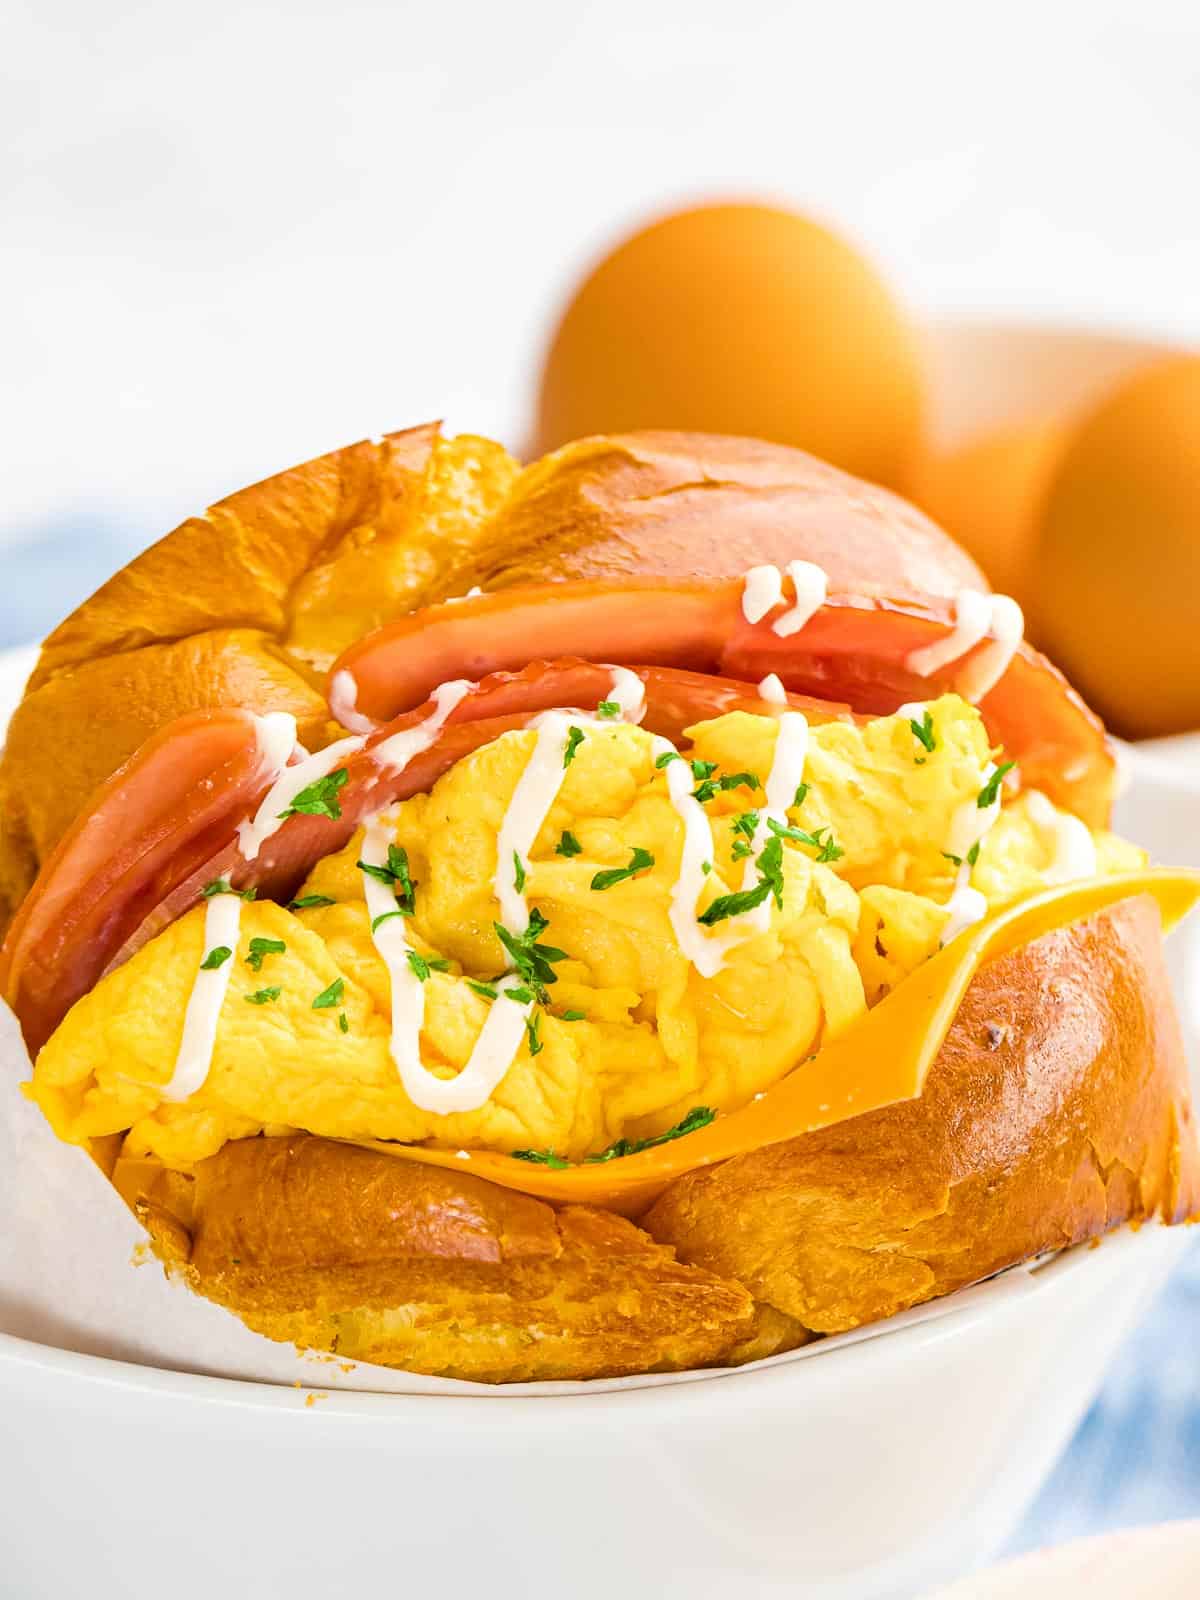 Breakfast egg sandwich inspired by Korean egg drop sandwich made with scrambled eggs, cheese, bacon, with mayo and parsley garnish.